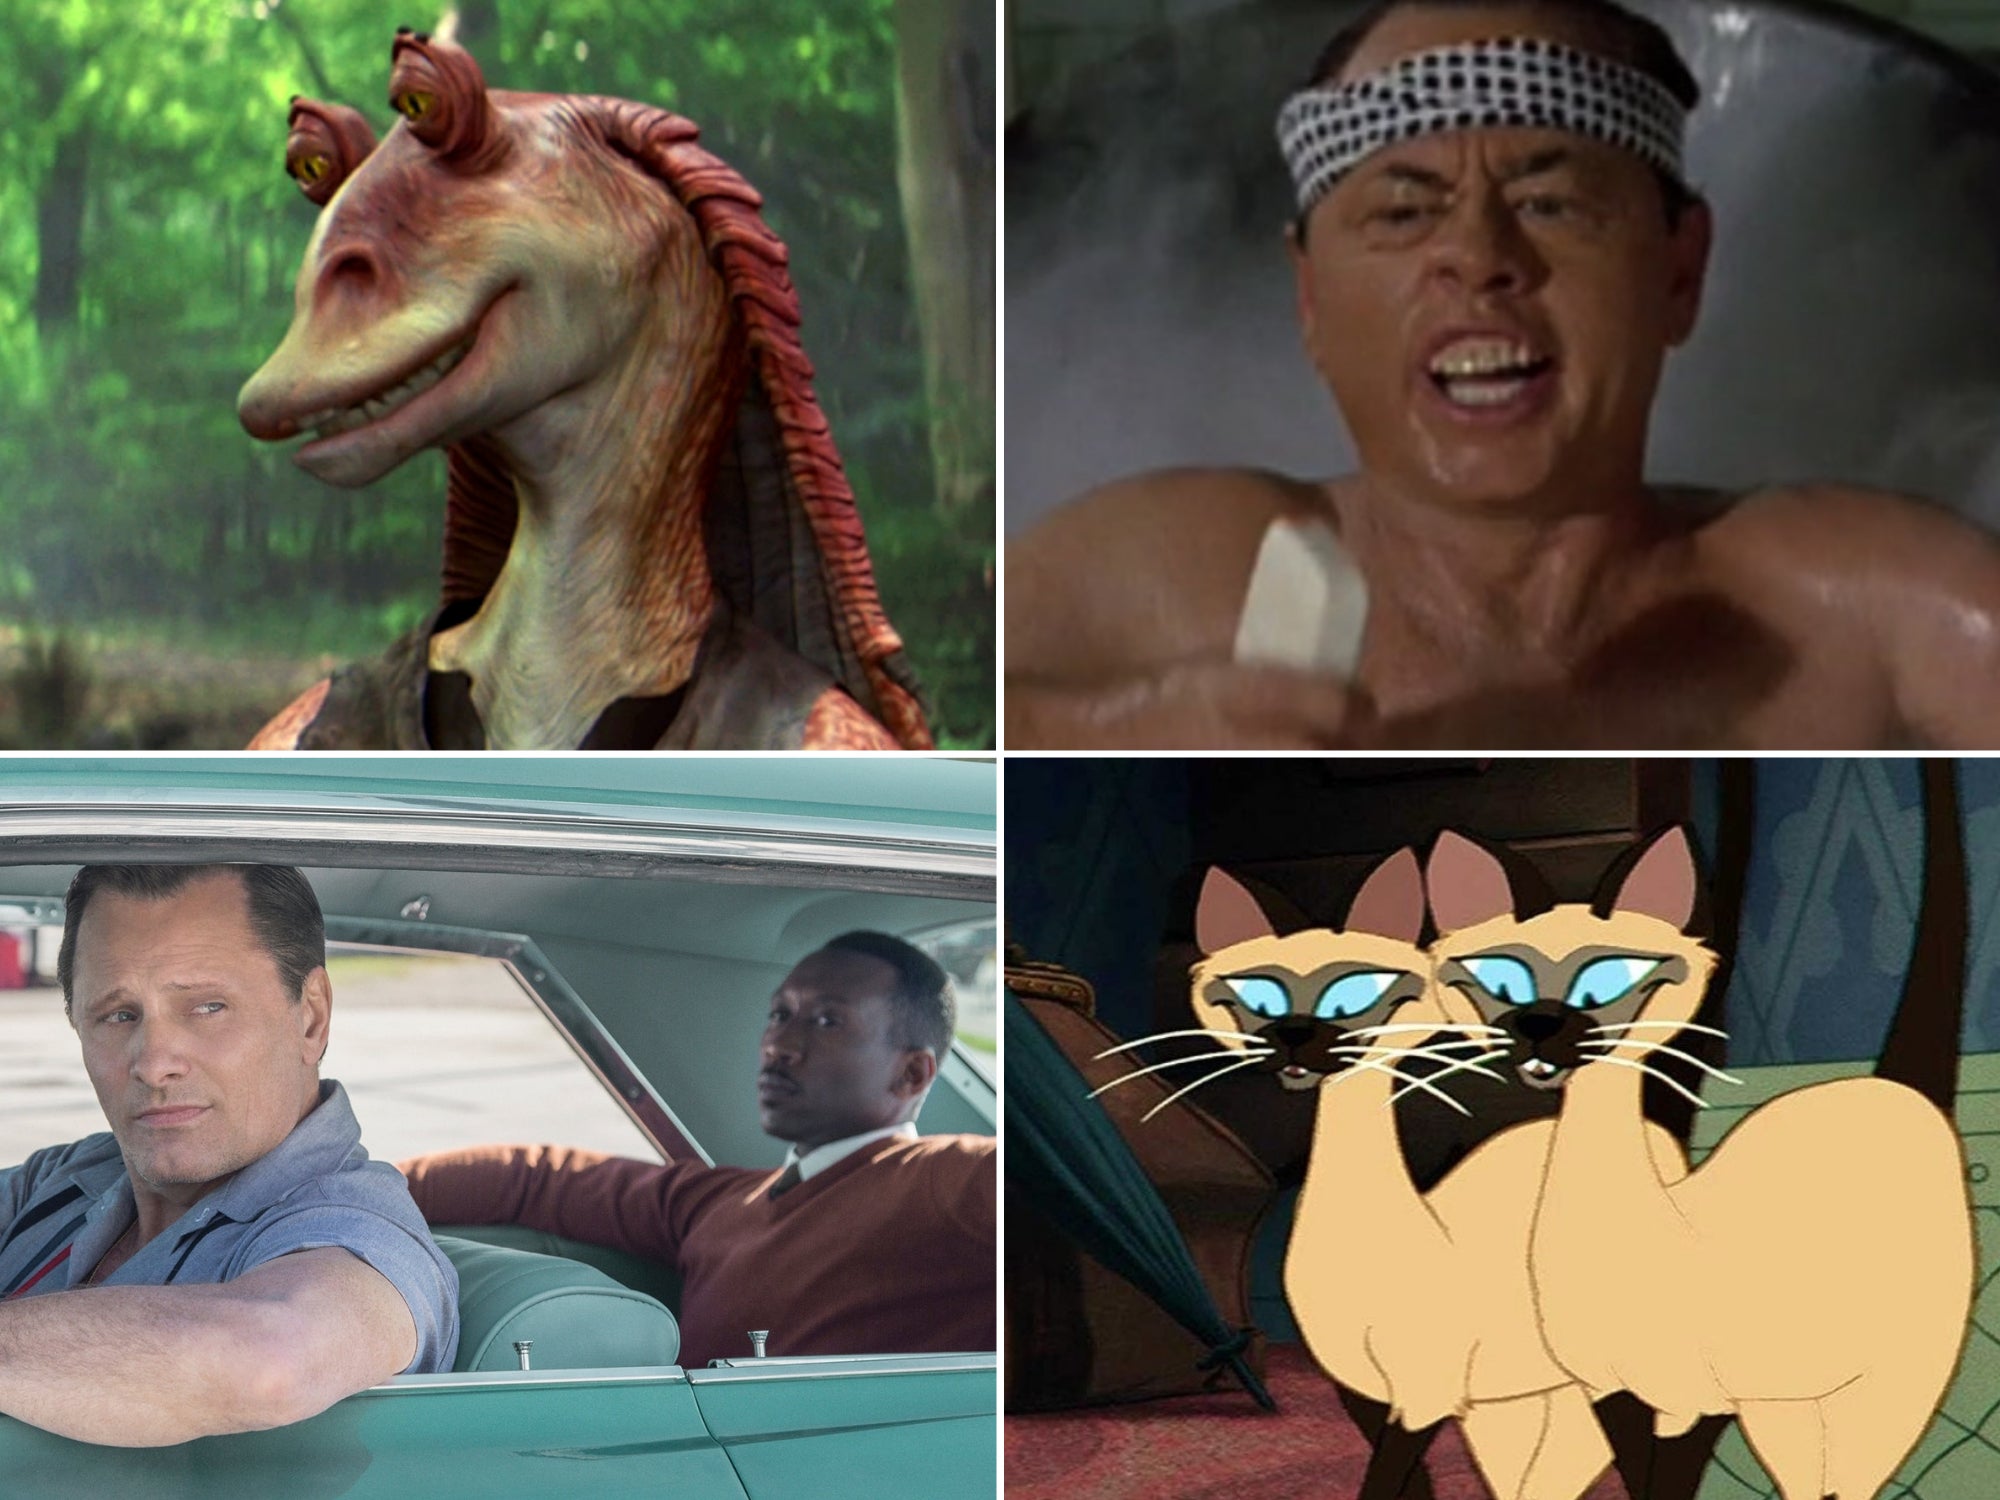 Clockwise from top right: Mickey Rooney in 'Breakfast at Tiffany's', the siamese cats in 'Lady and the Tramp', Viggo Mortensen and Mahershala Ali in 'Green Book', and Jar Jar Binks in 'Star Wars: The Phantom Menace'